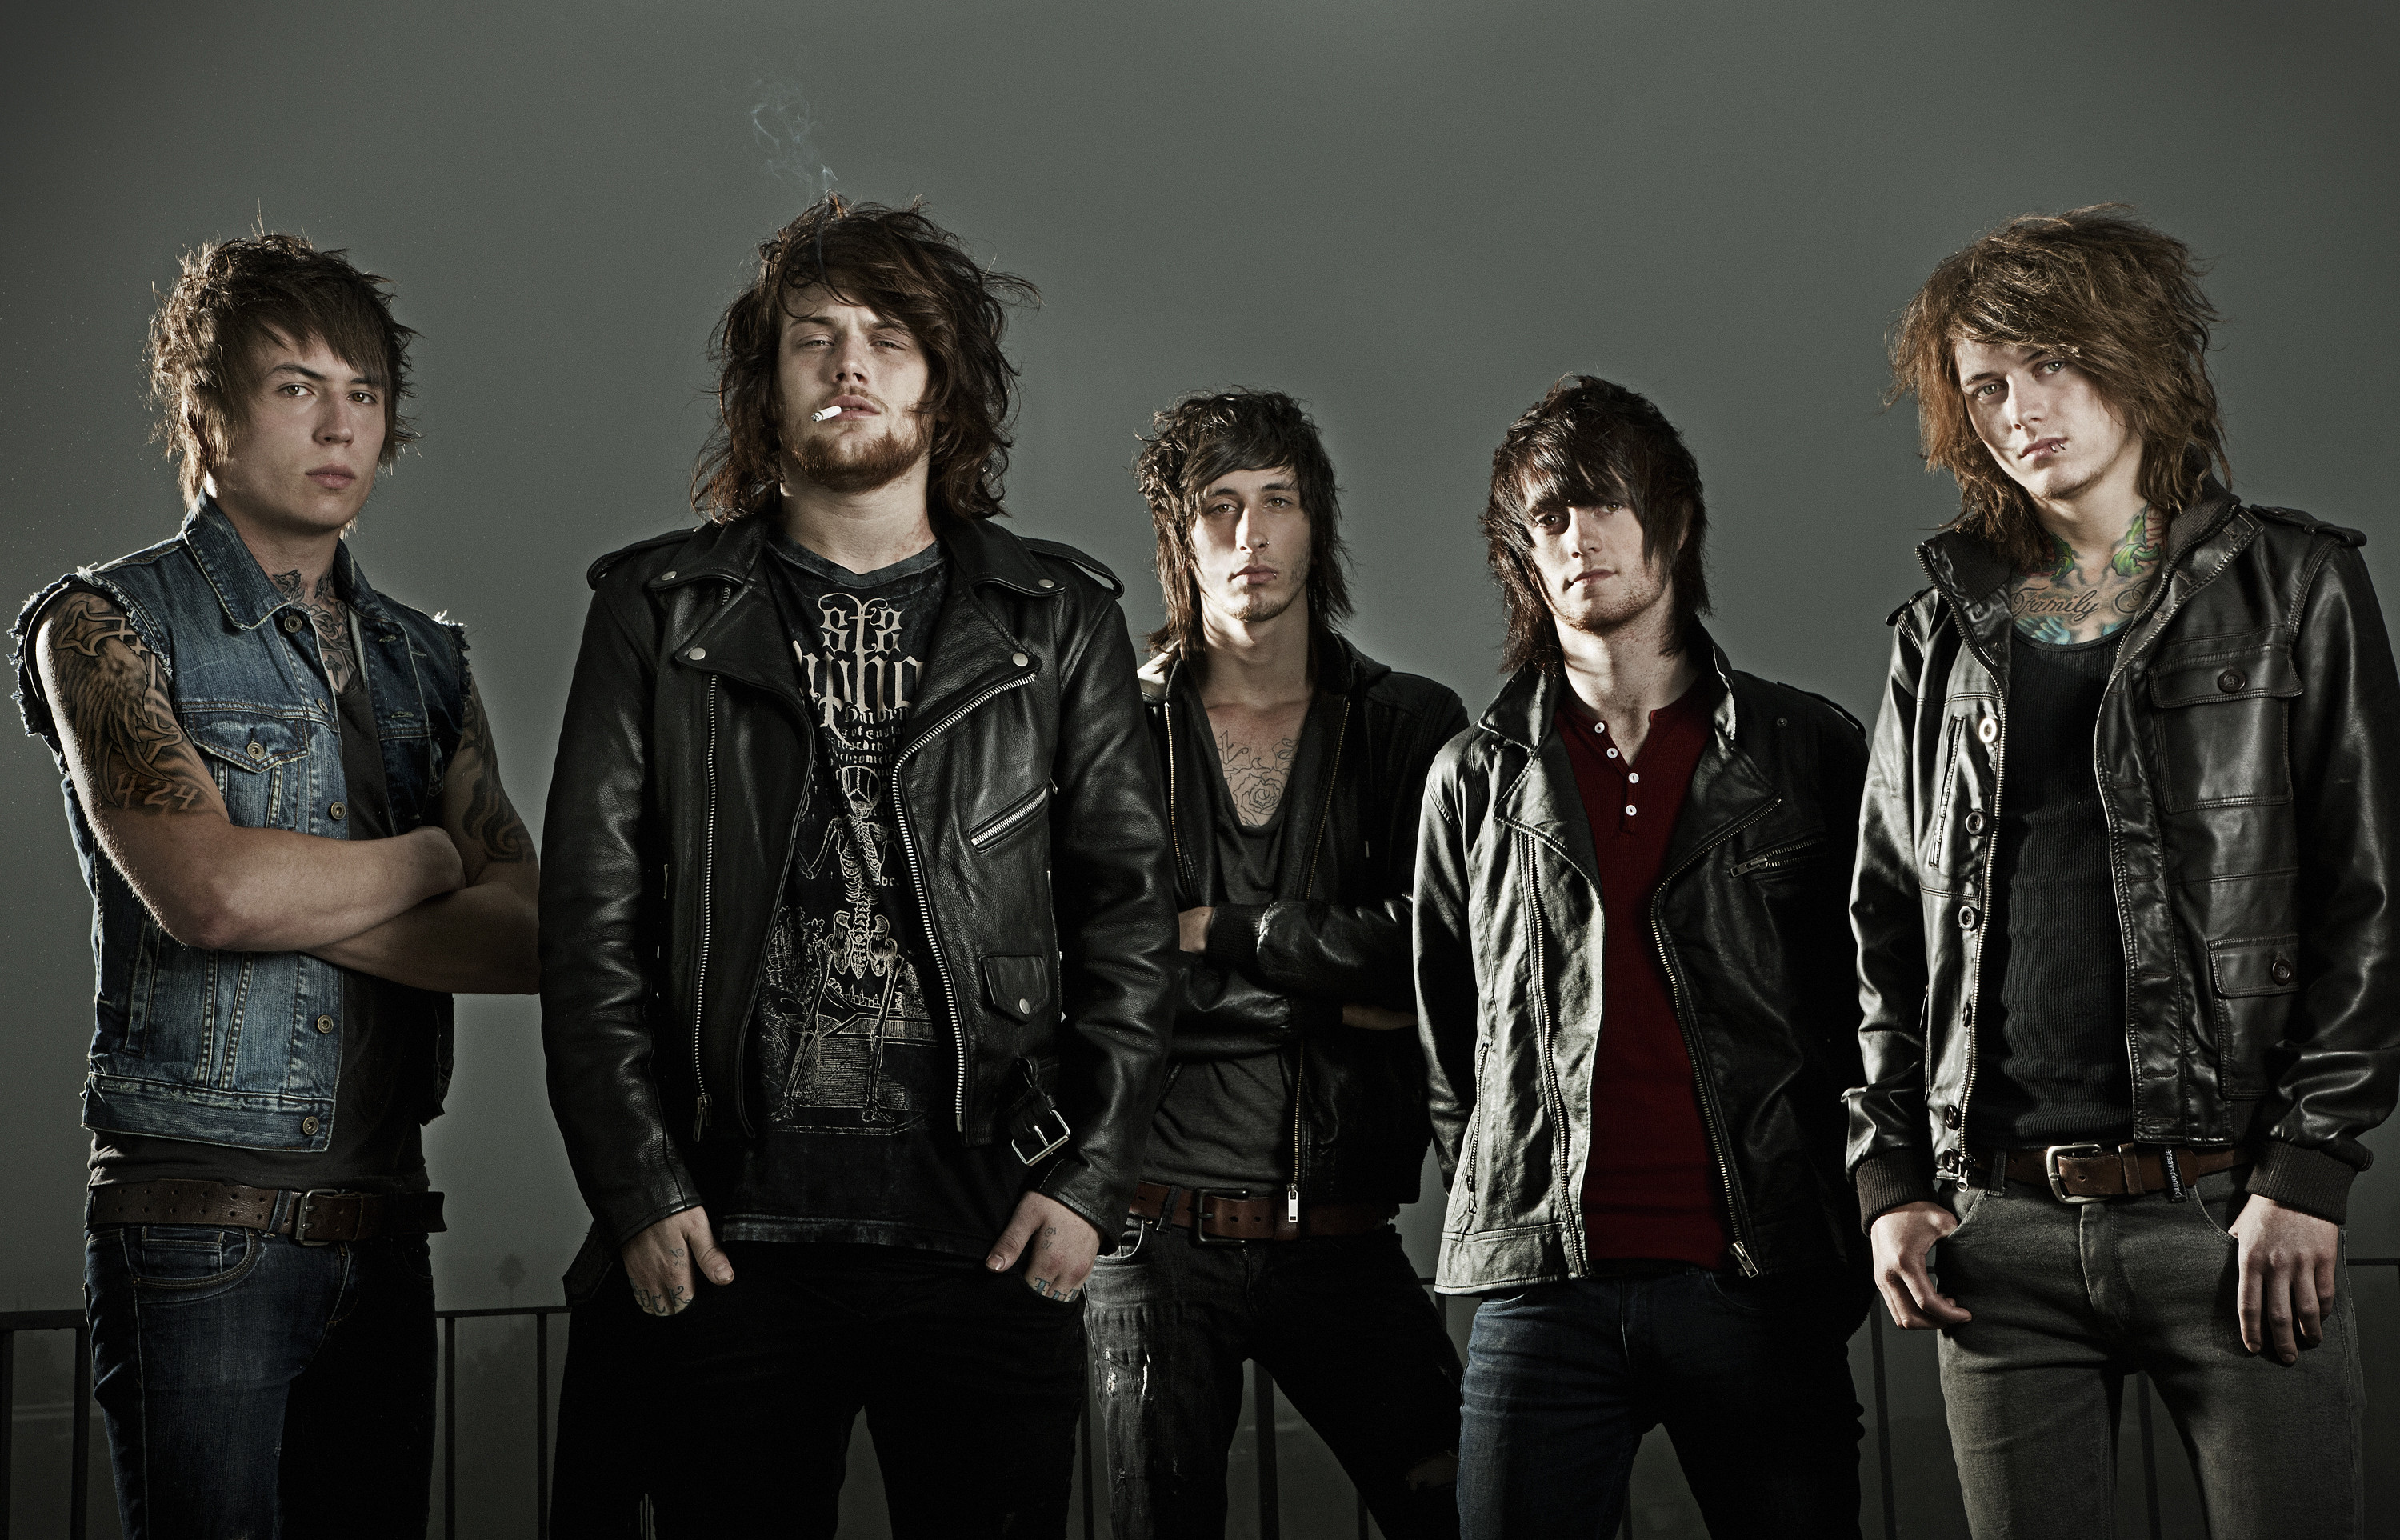 3000x1925 ASKING ALEXANDRIA - My top 5 favorite songs by them: 1. I Was Once